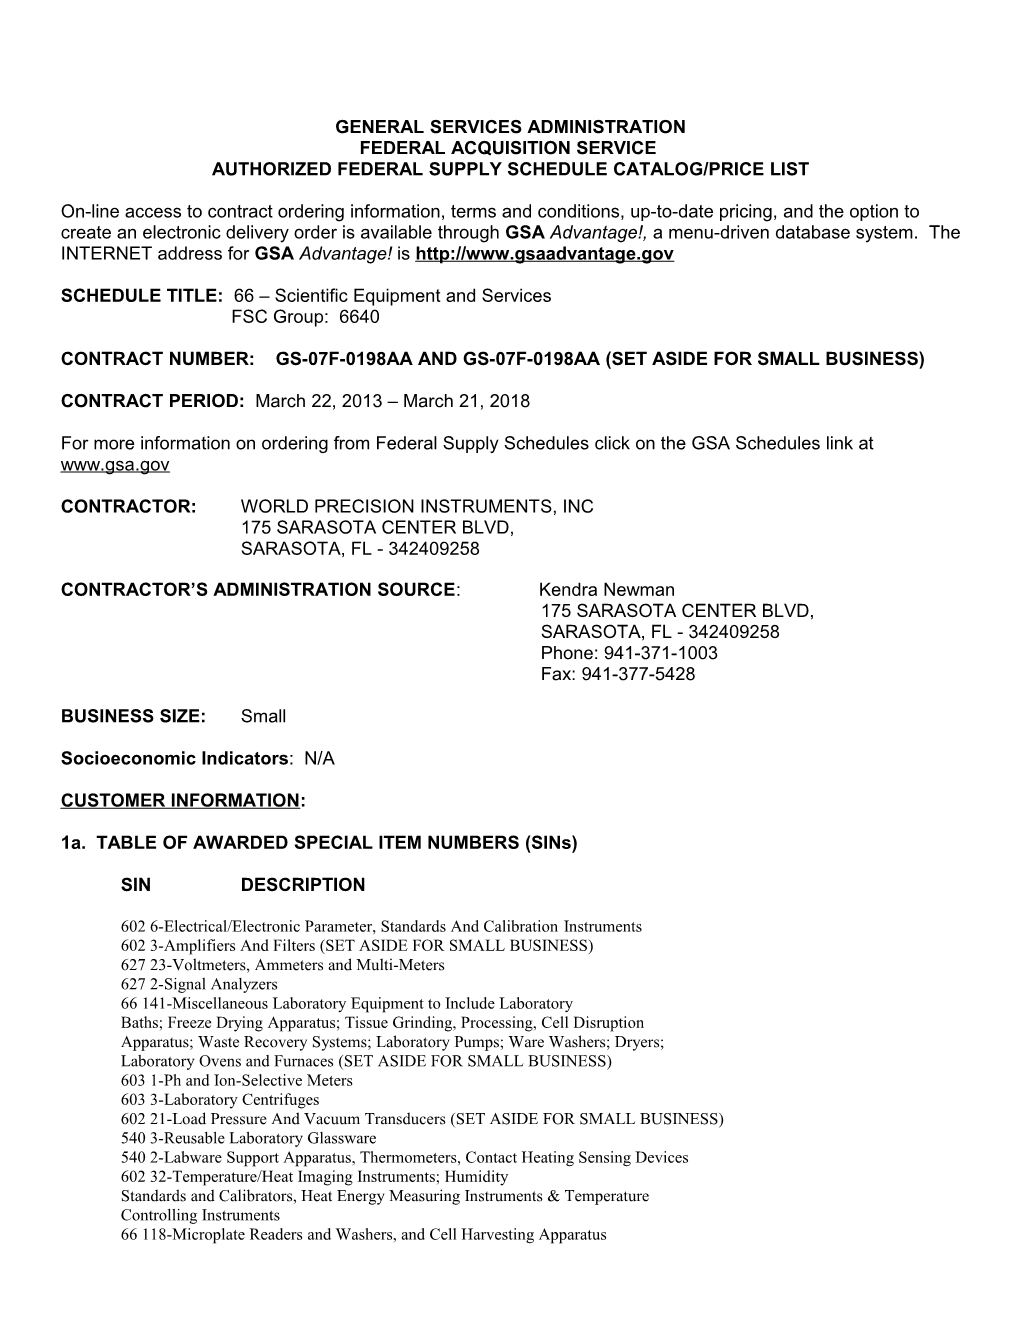 Standard Form 1449, Contract for Commercial Items (Cont D) Page 1A s4